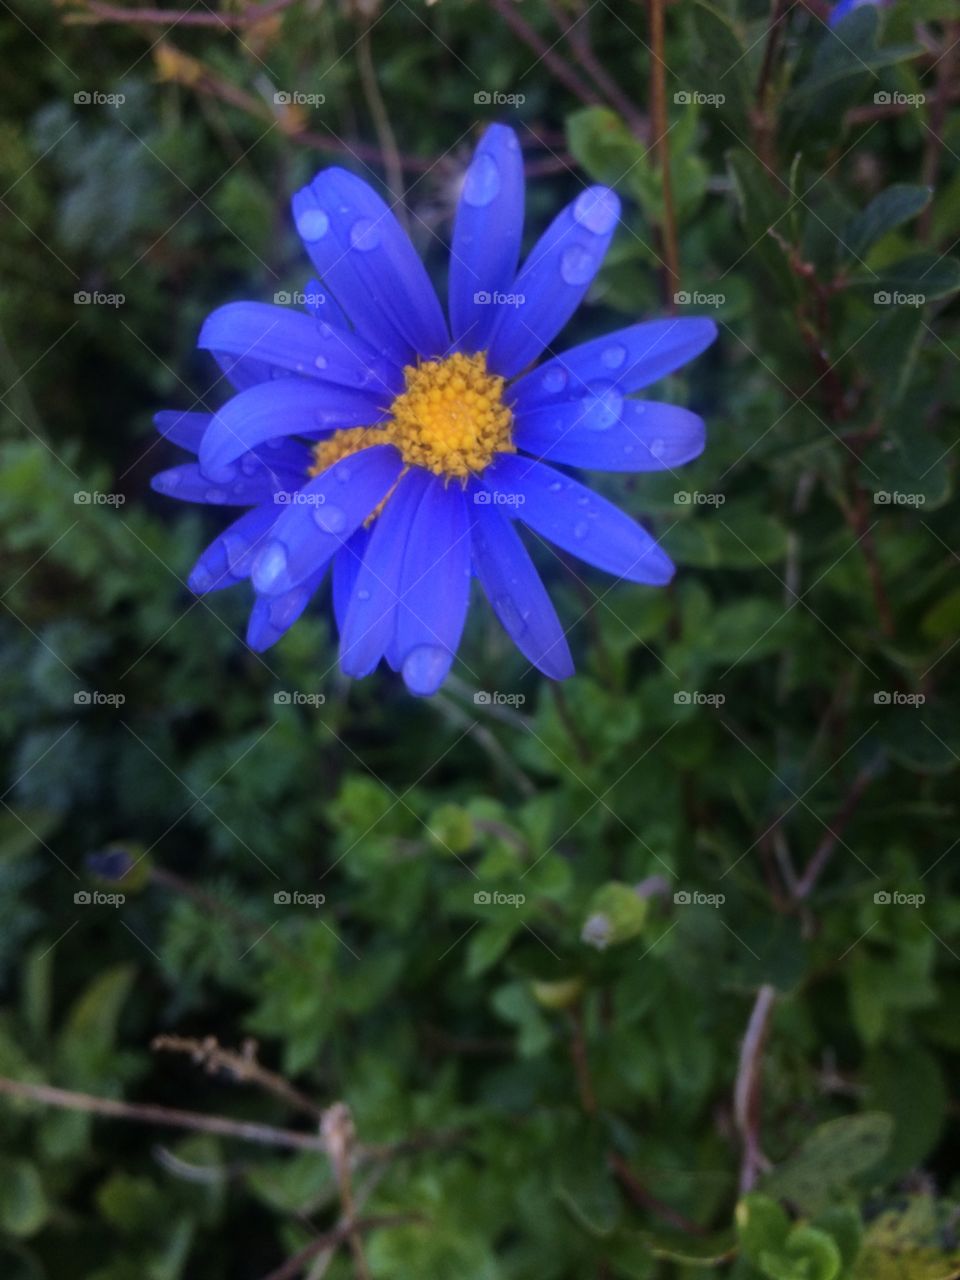 Felecia Amelloides or blue Marguerite or blue Daisy with water droplets on the petals outdoors in the garden 